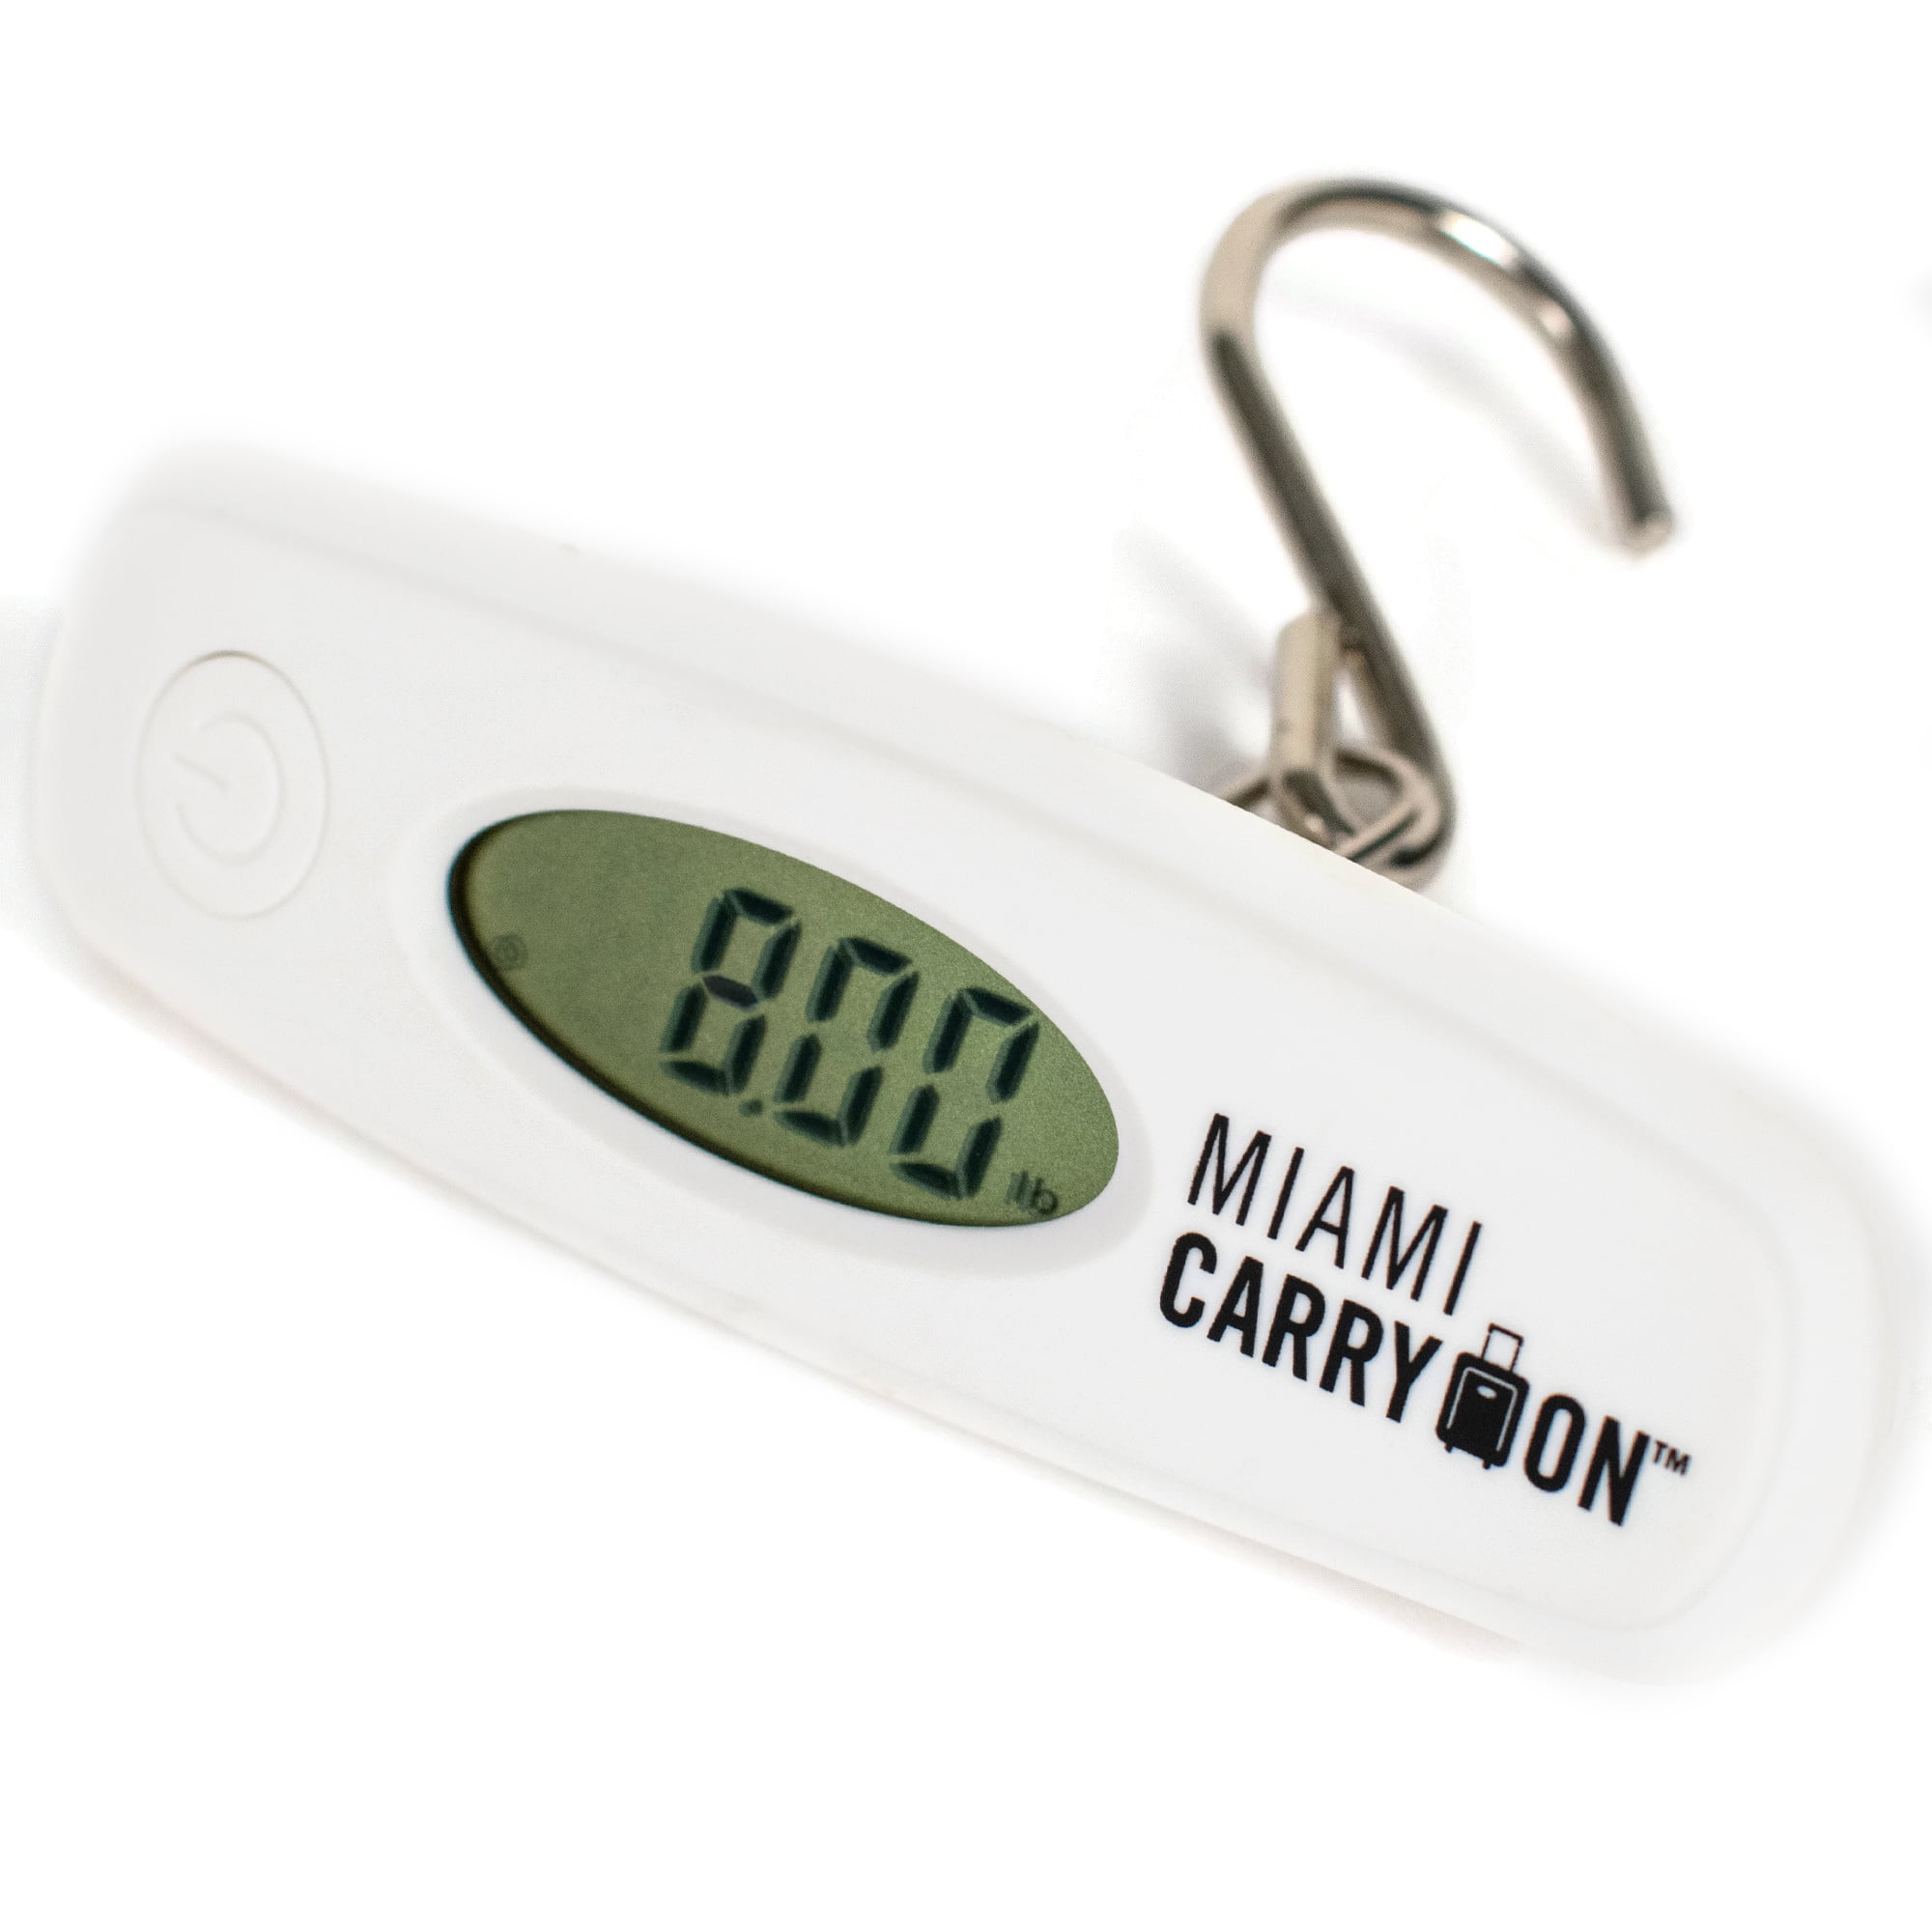 Miami Carryon TRASCTN Mechanical Luggage Scale with Tape Measure - 75 lbs (Beige)